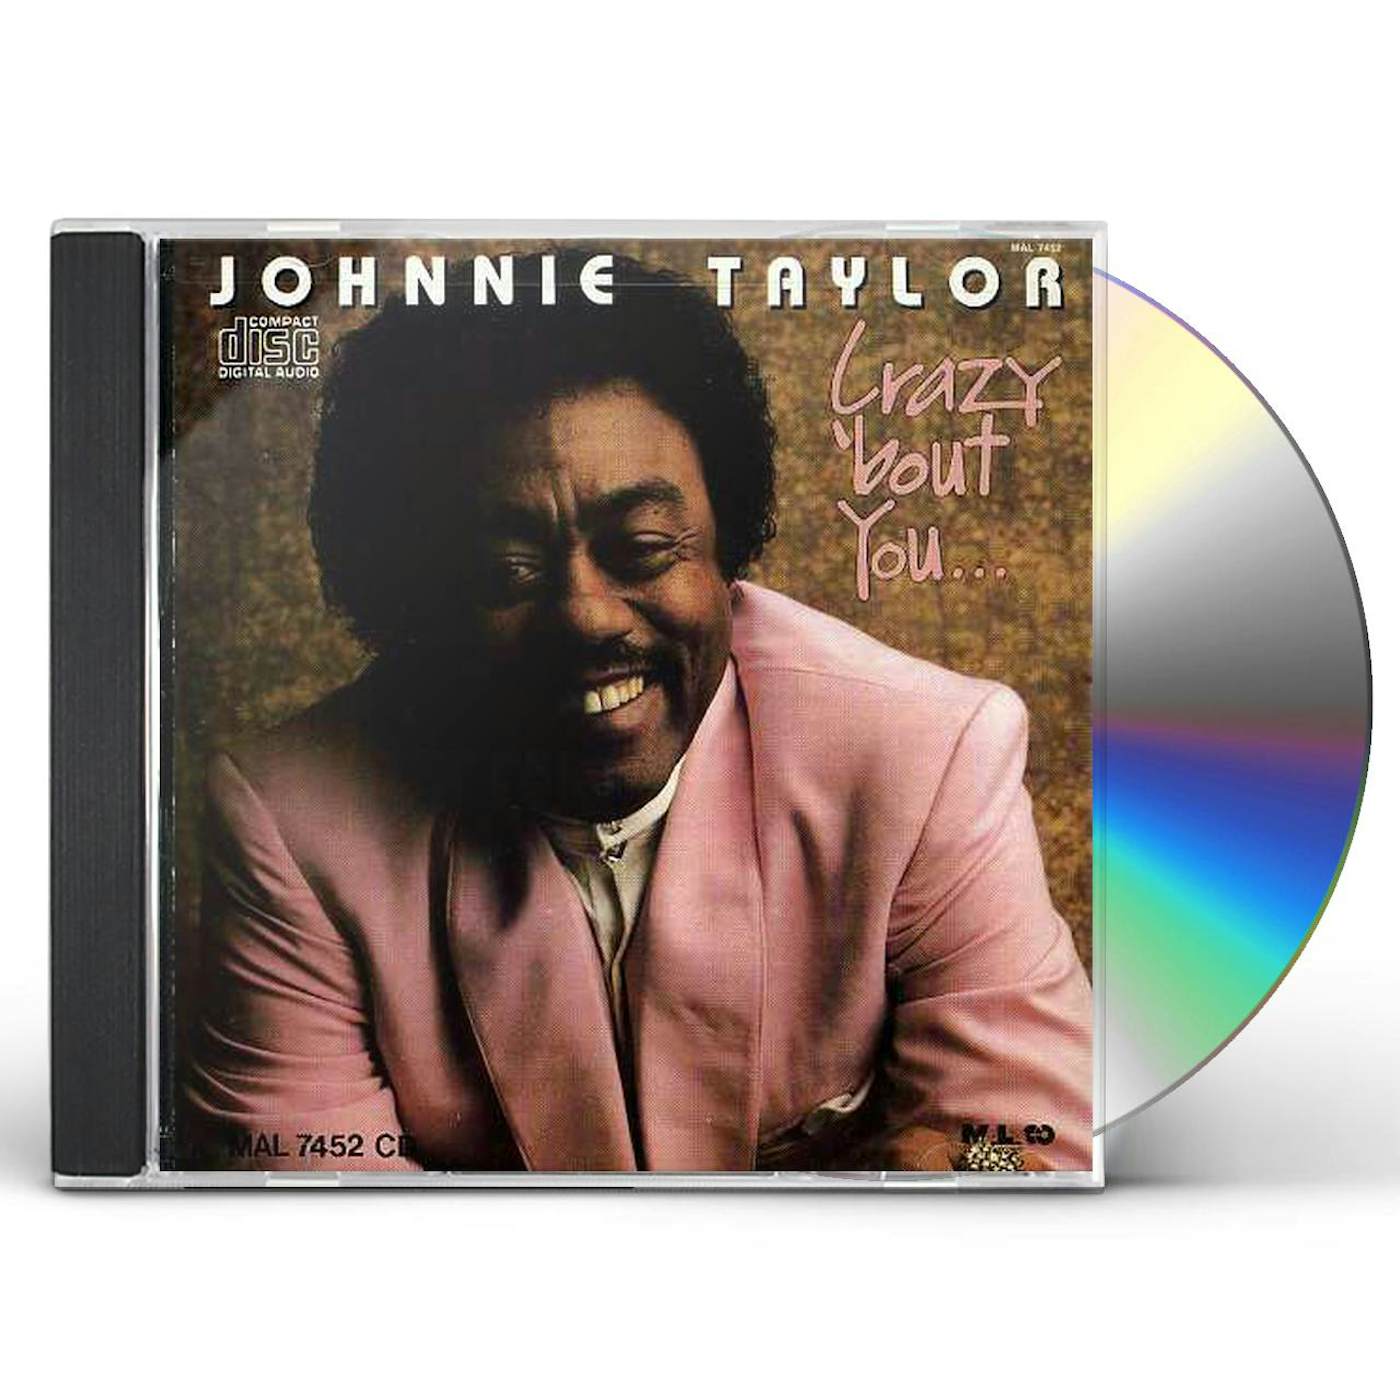 Johnnie Taylor CRAZY BOUT YOU CD